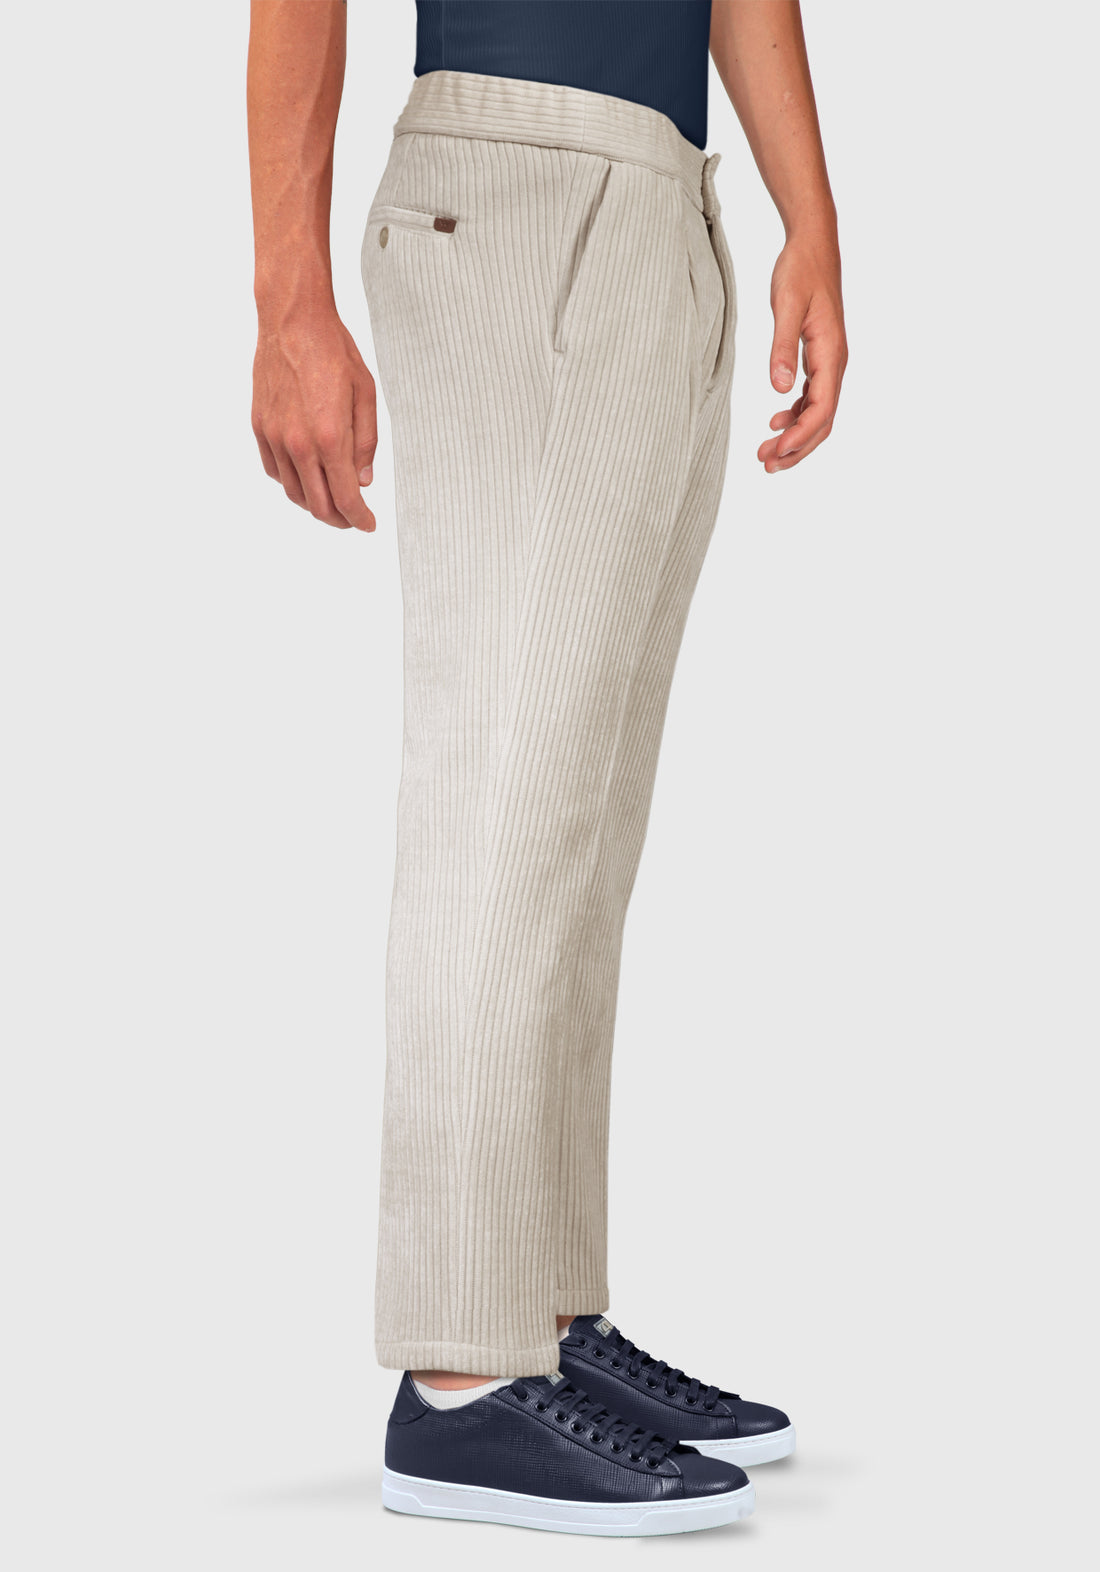 Trousers with side elastic in velvet fabric - Beige